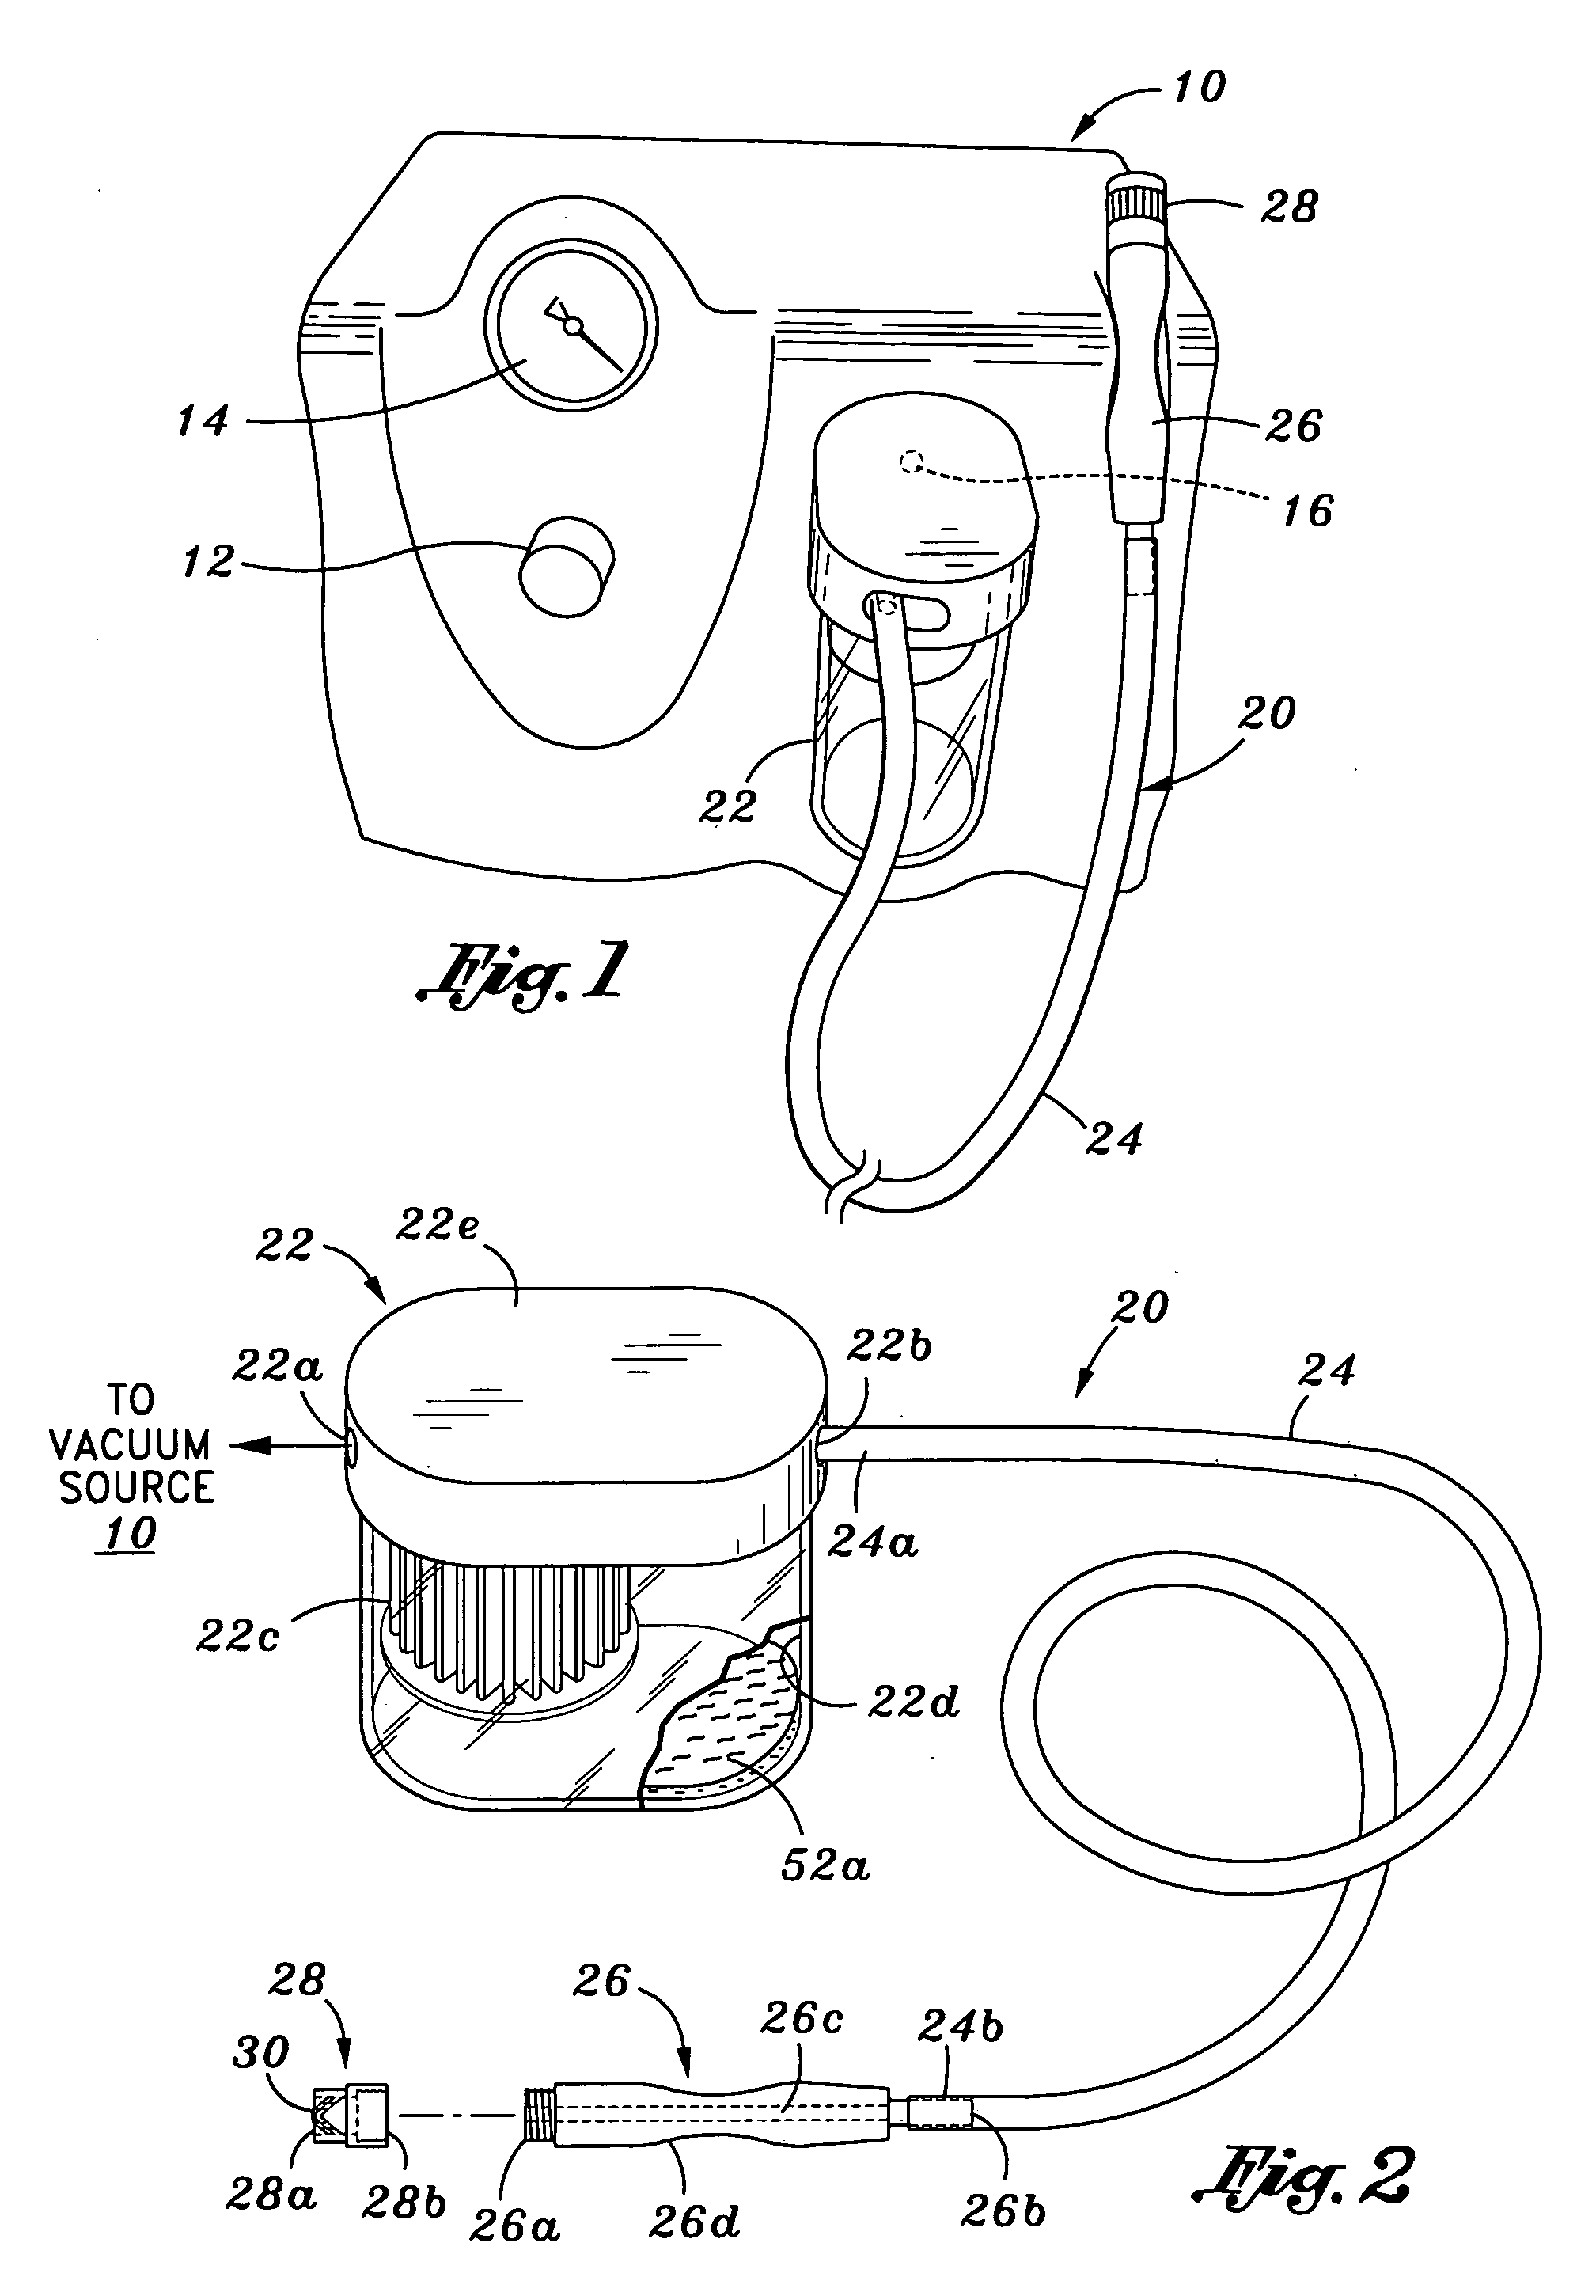 Hydro-dermabrasion apparatus and method of use